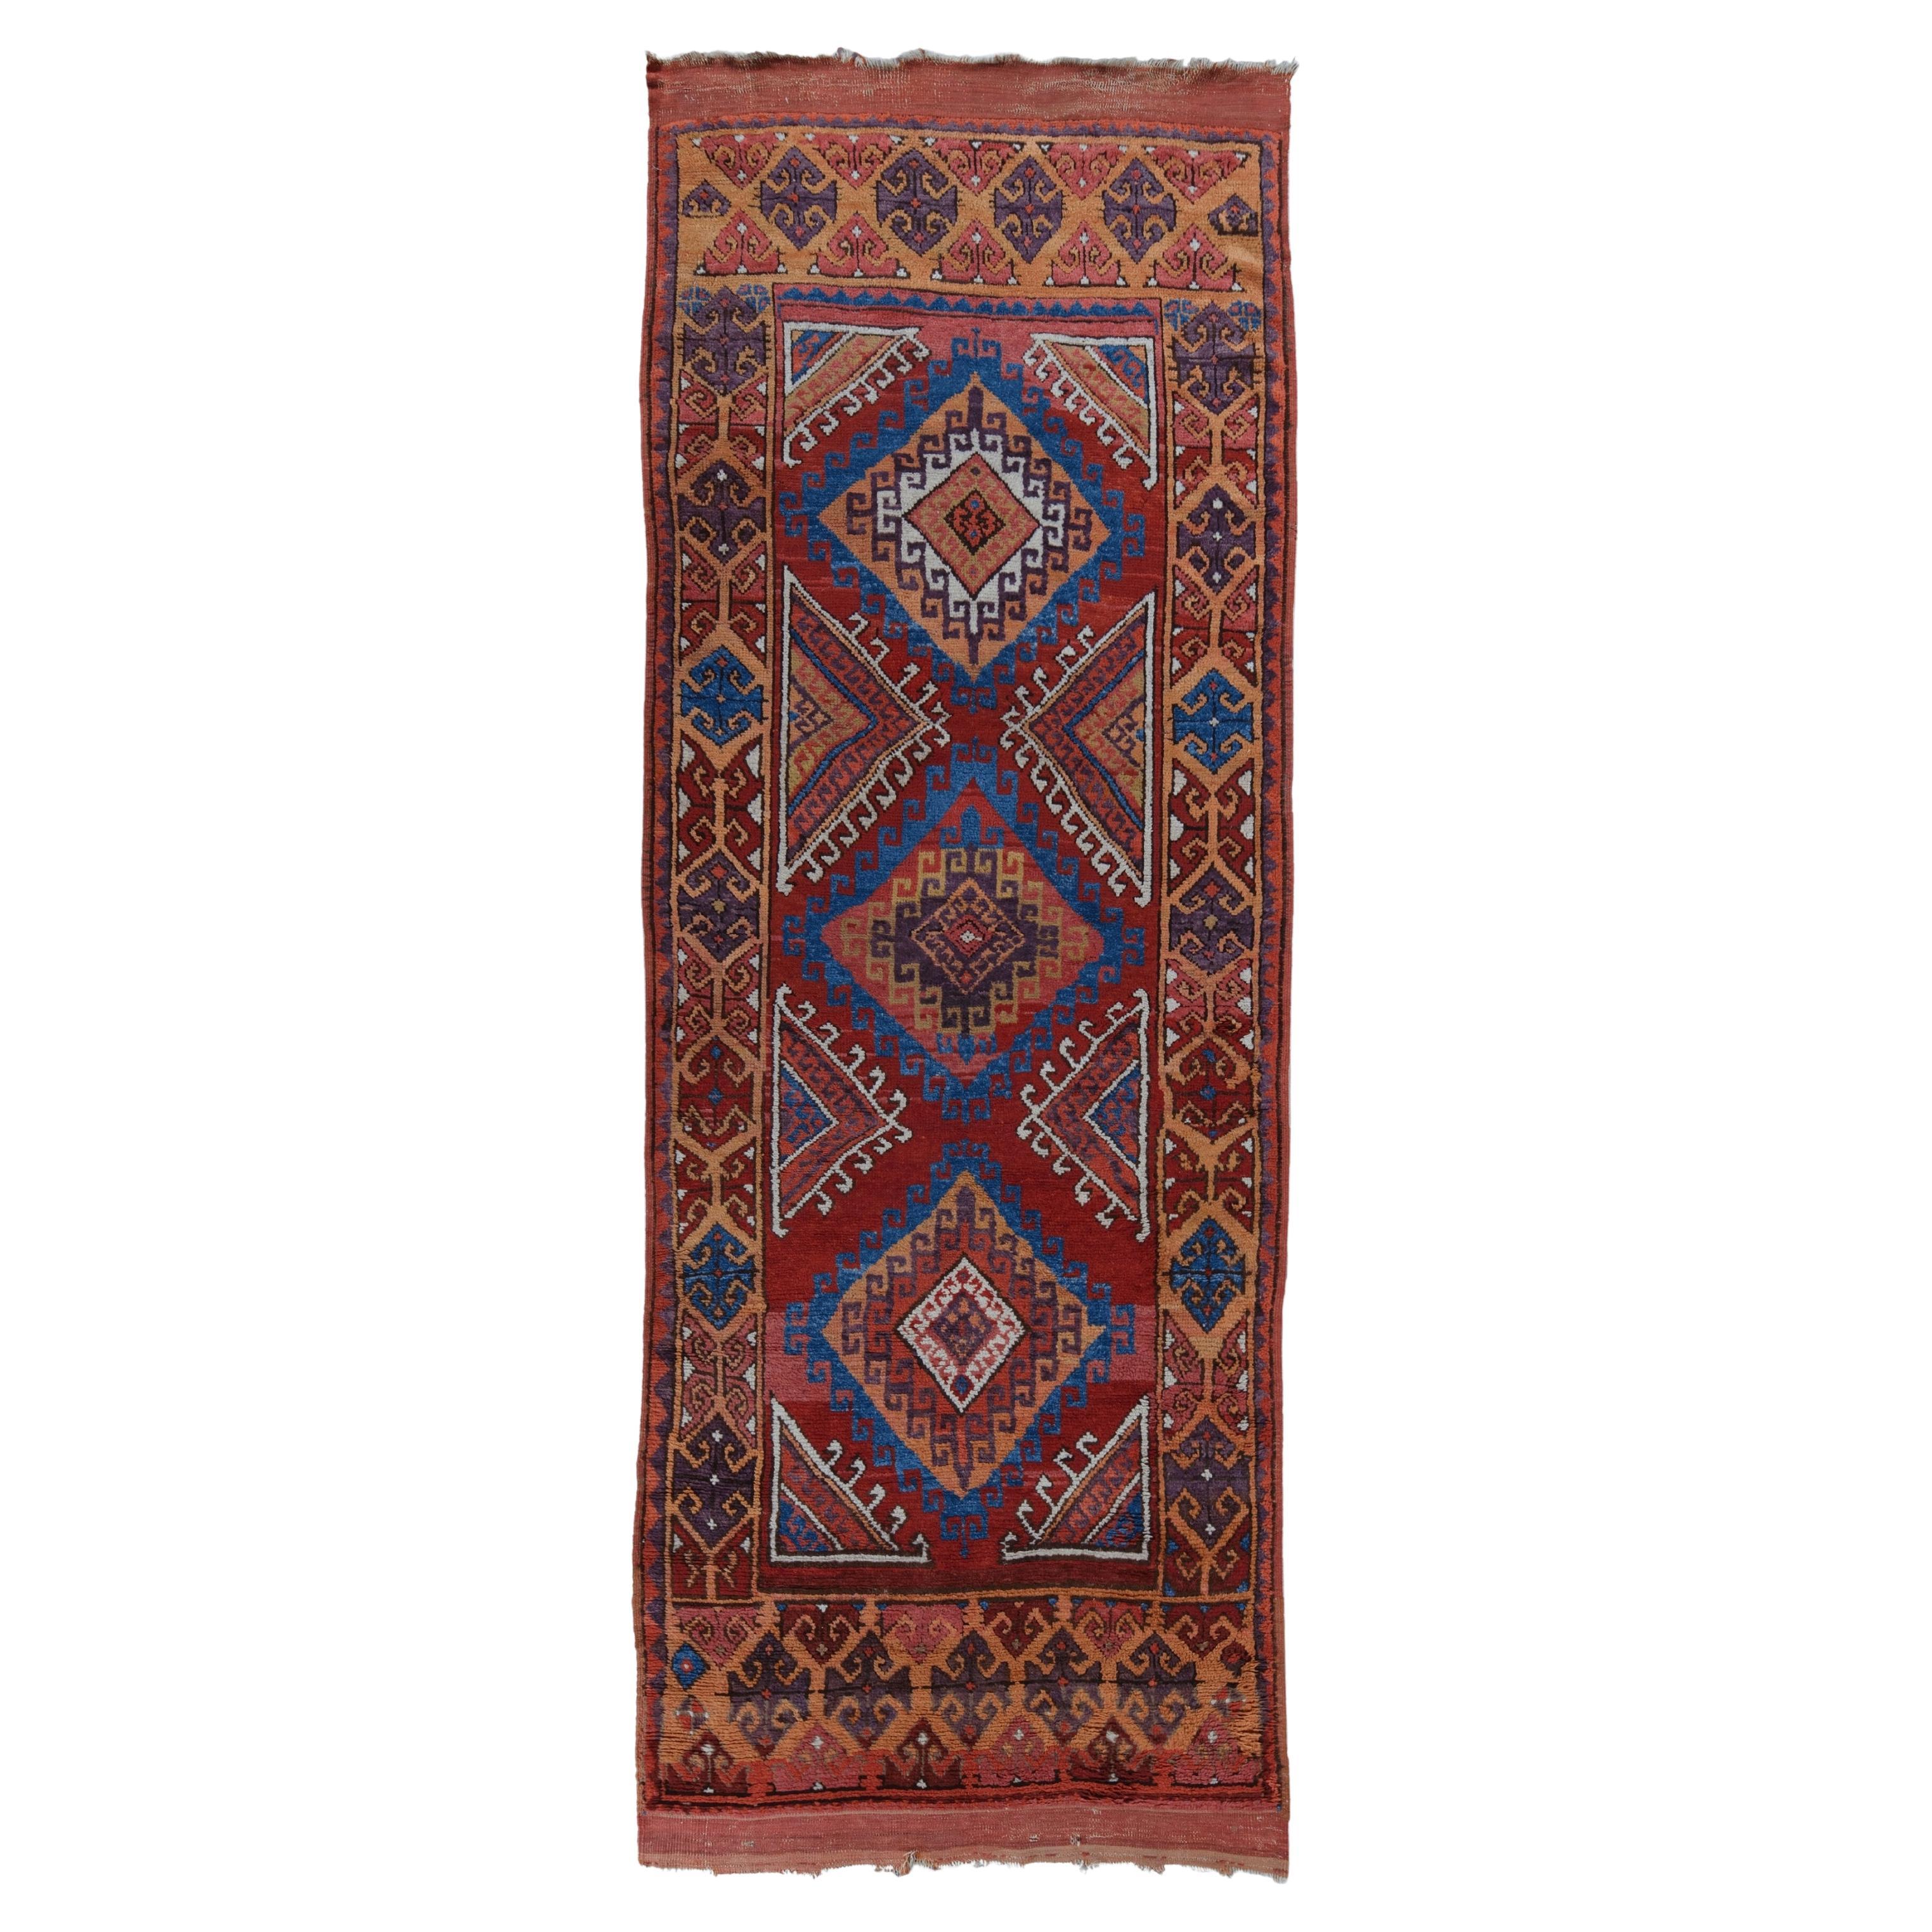 Middle of the 19th Century Urgup Runner - Antique Rug, Antique Wool Runner For Sale